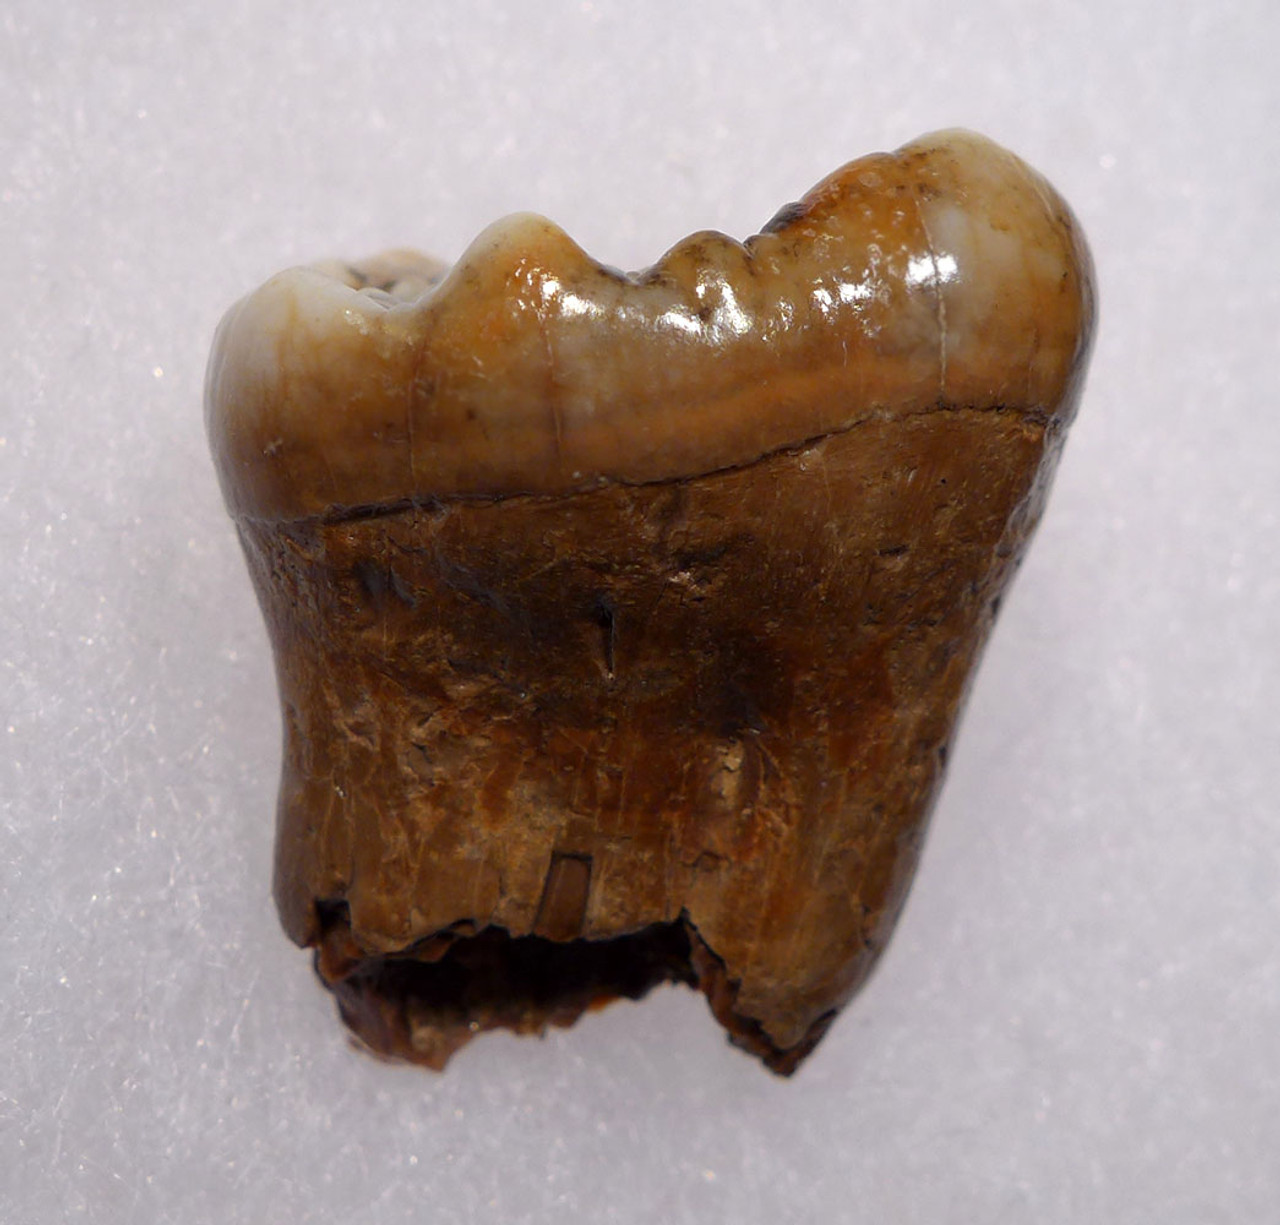 CHOICE AUSTRIAN CAVE BEAR FOSSIL MOLAR TOOTH WITH FULL ROOT FROM THE FAMOUS DRACHENHOHLE DRAGONS CAVE  *LM40-188